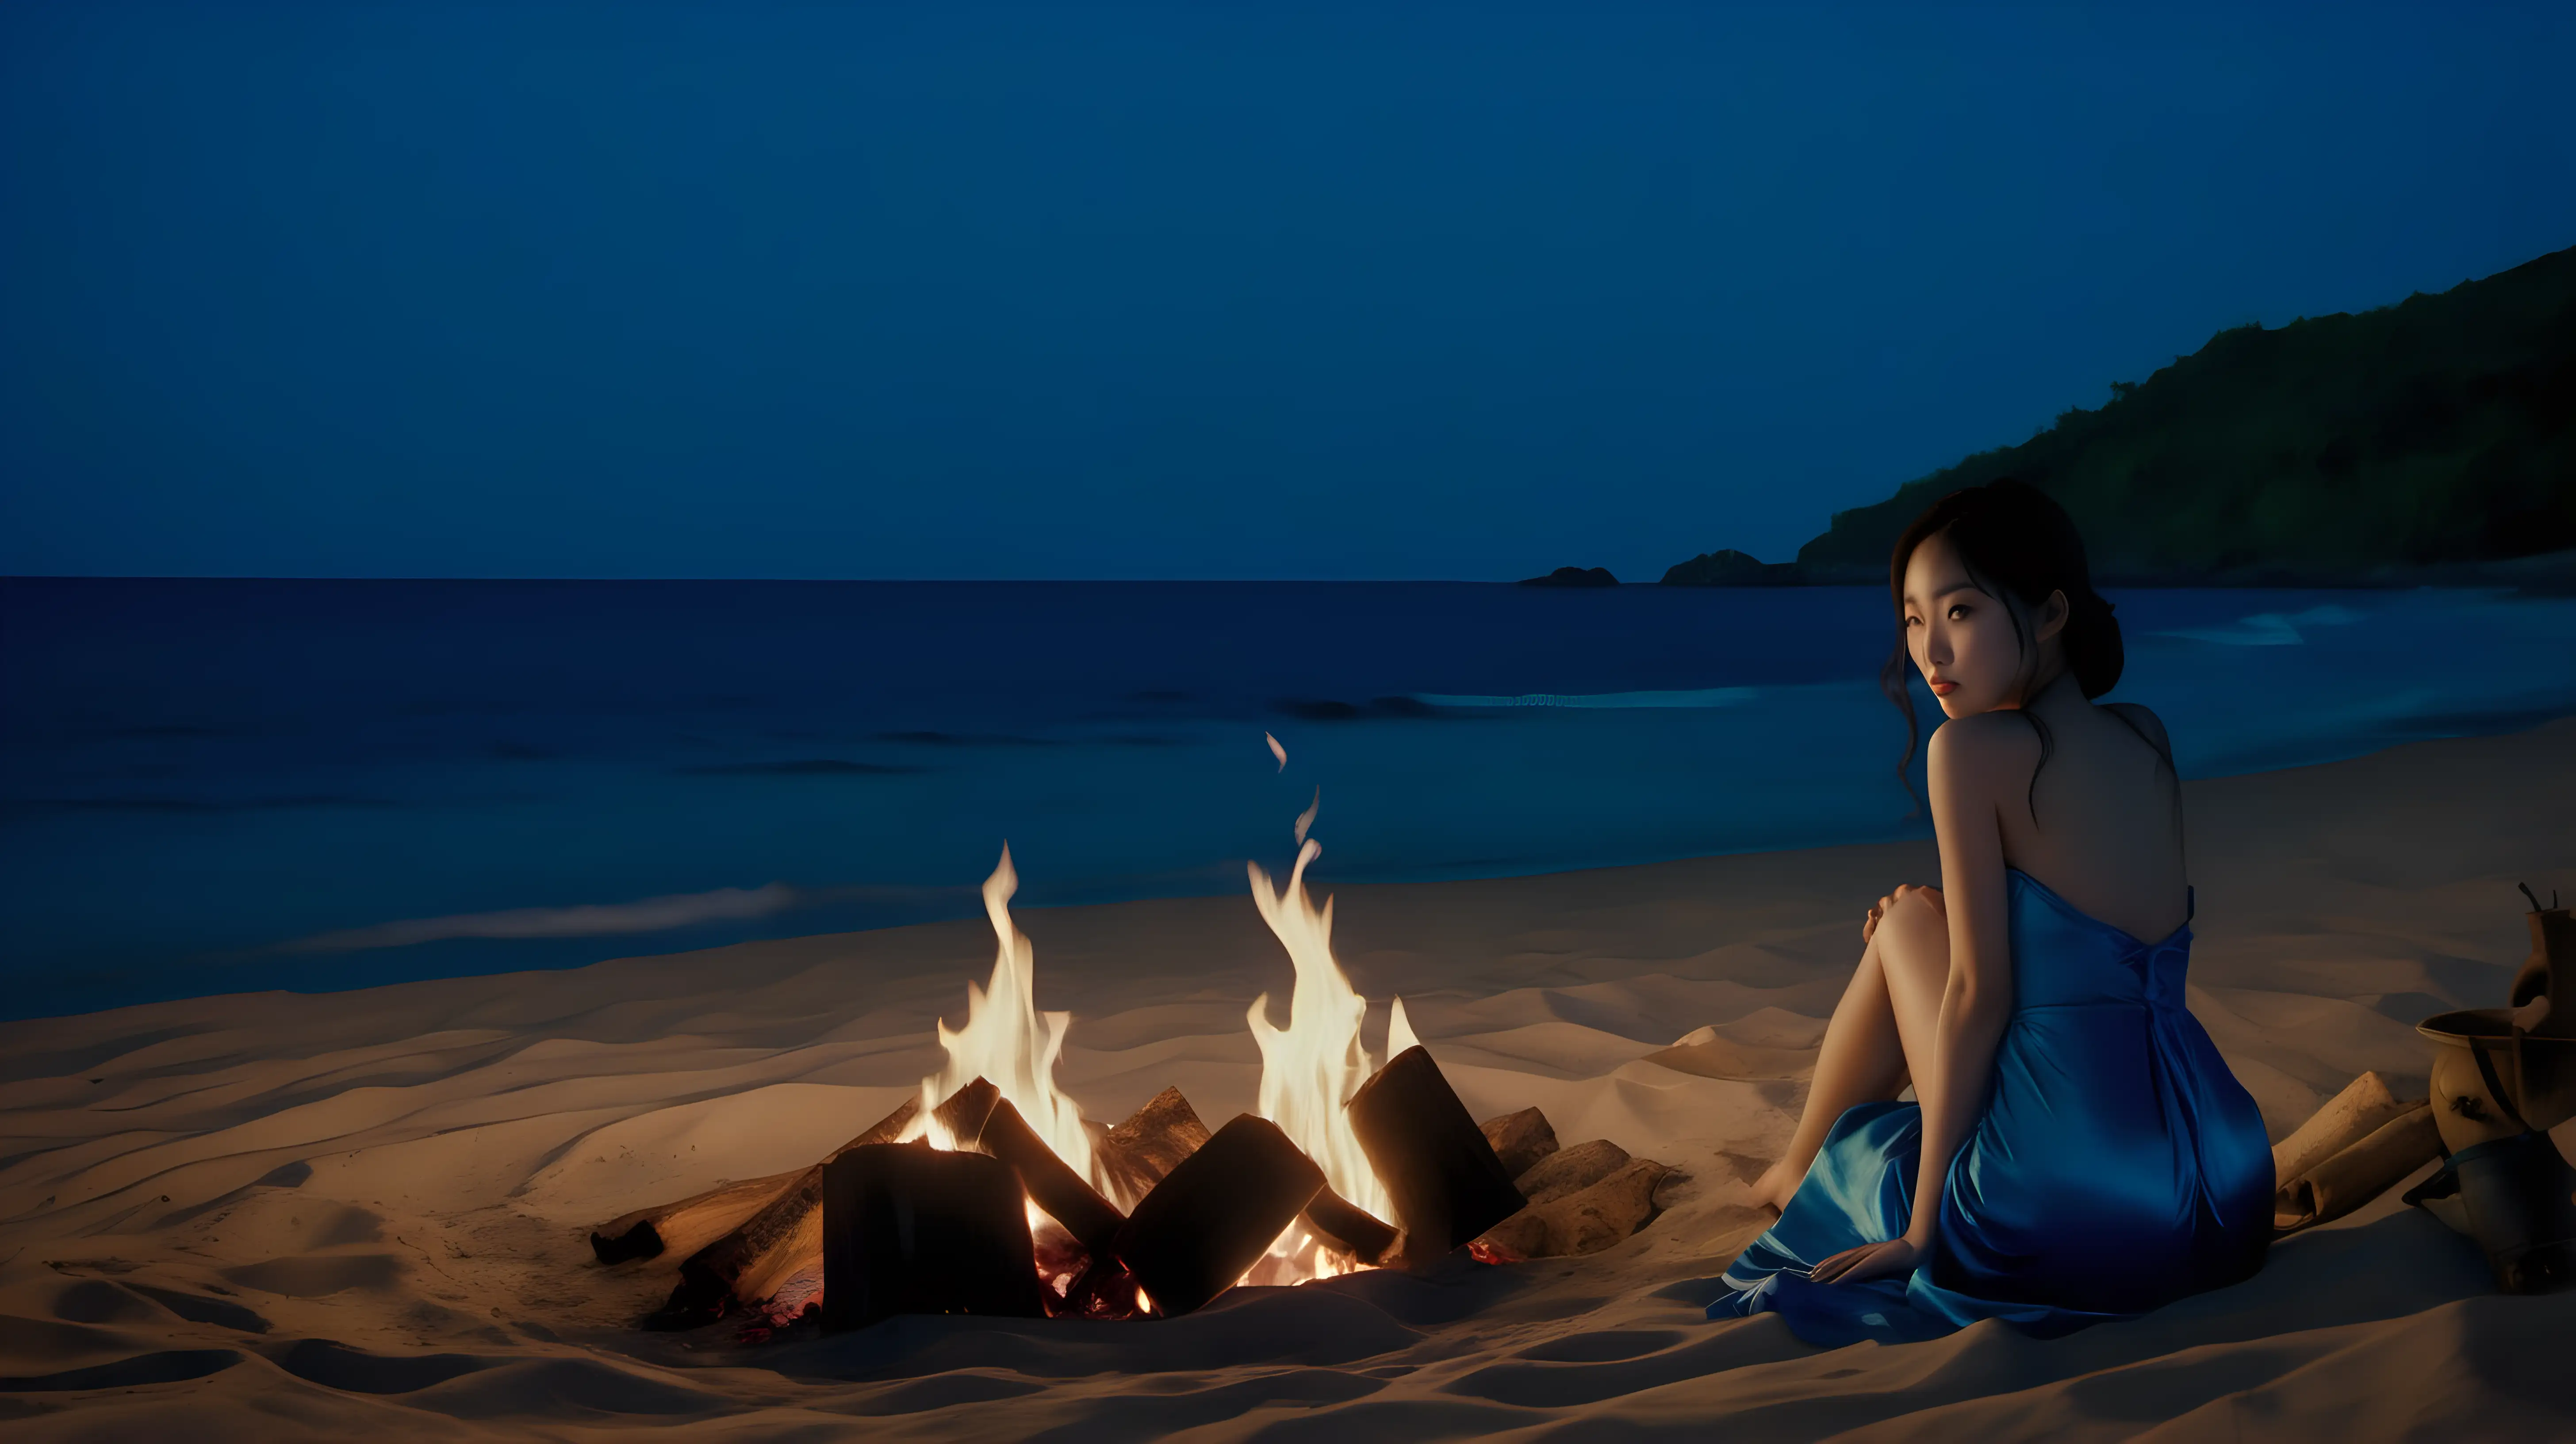 A tropical island beach. The water is blue. There are waves. There is a small camp fire at the far side of the beach. A korean woman at her late 20s sitting alone beside the camp fire. She has full breasts. She is wearing a blue silk dress. The time is at dusk.